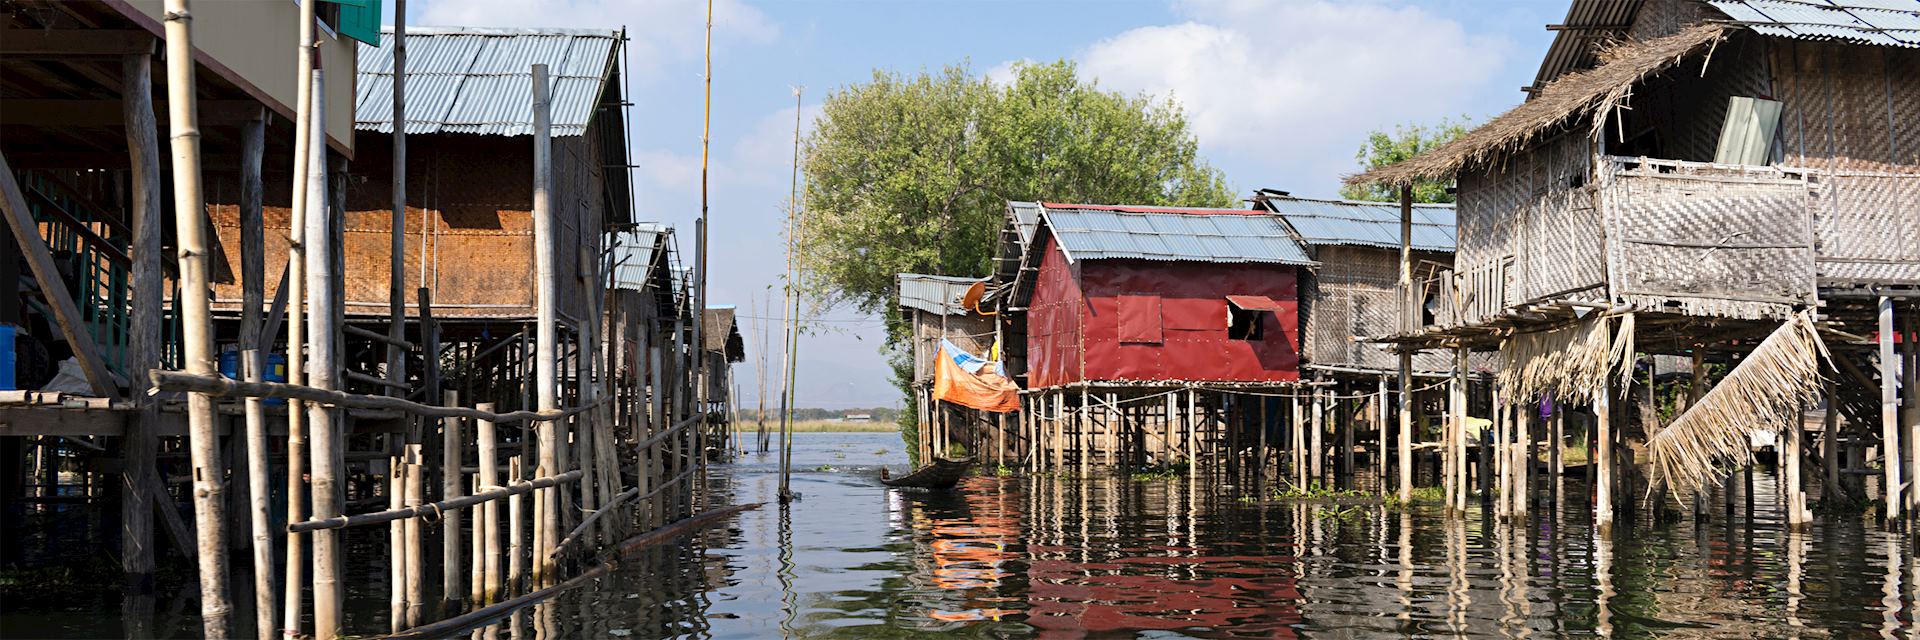 Wooden houses on the water in Nyaung Shwe